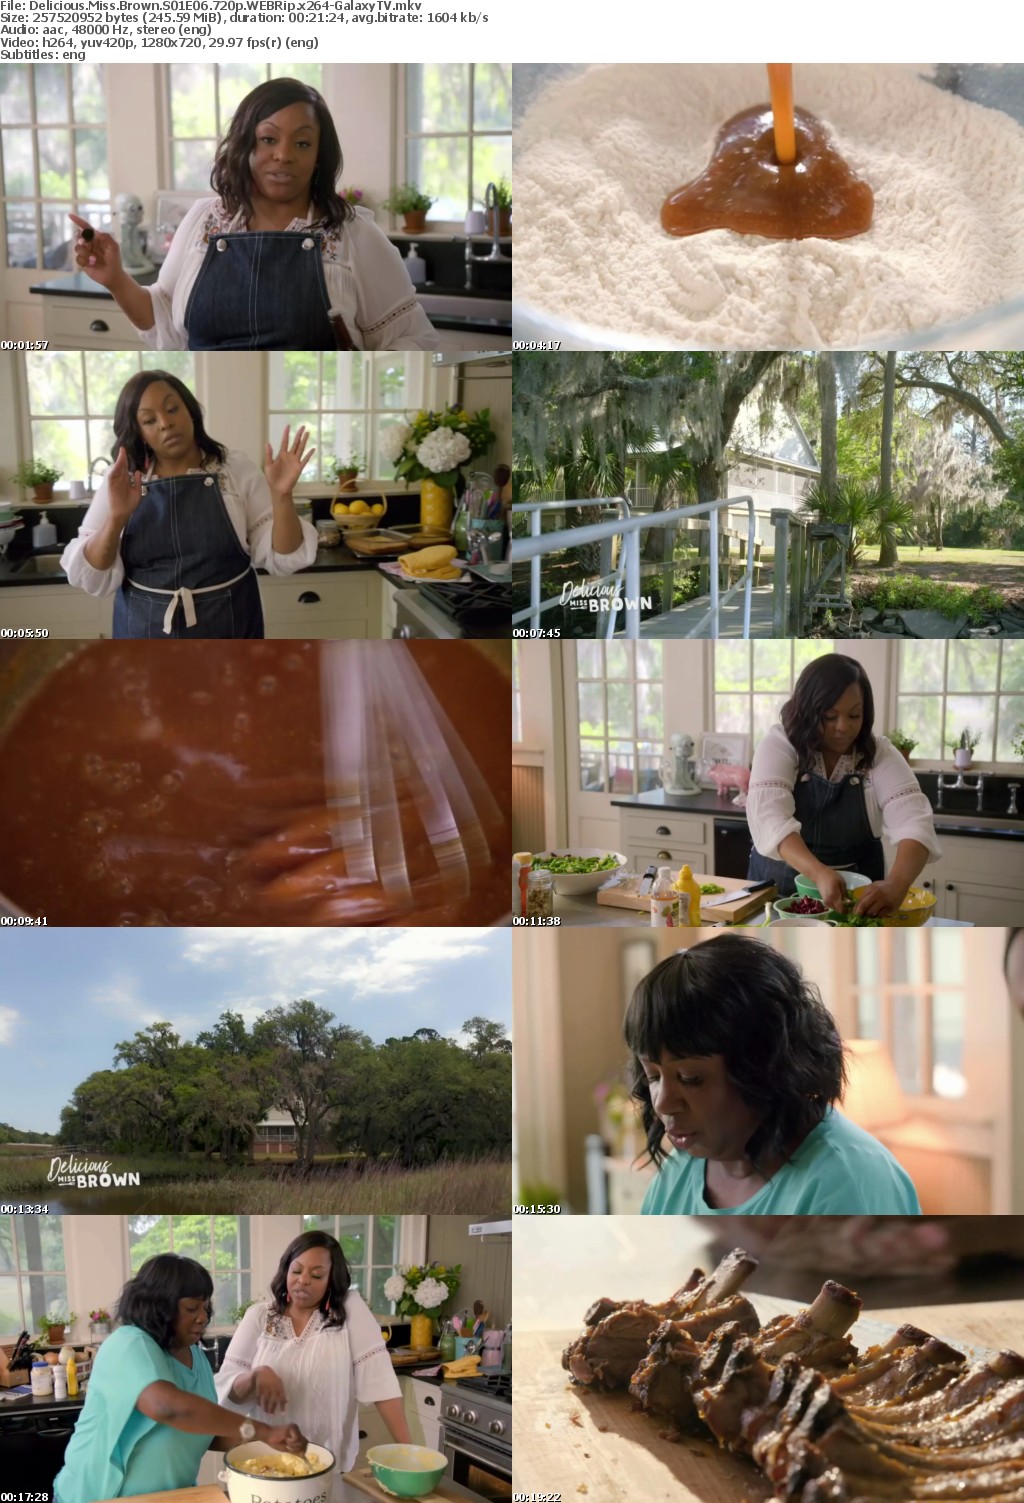 Delicious Miss Brown S01 COMPLETE 720p WEBRip x264-GalaxyTV